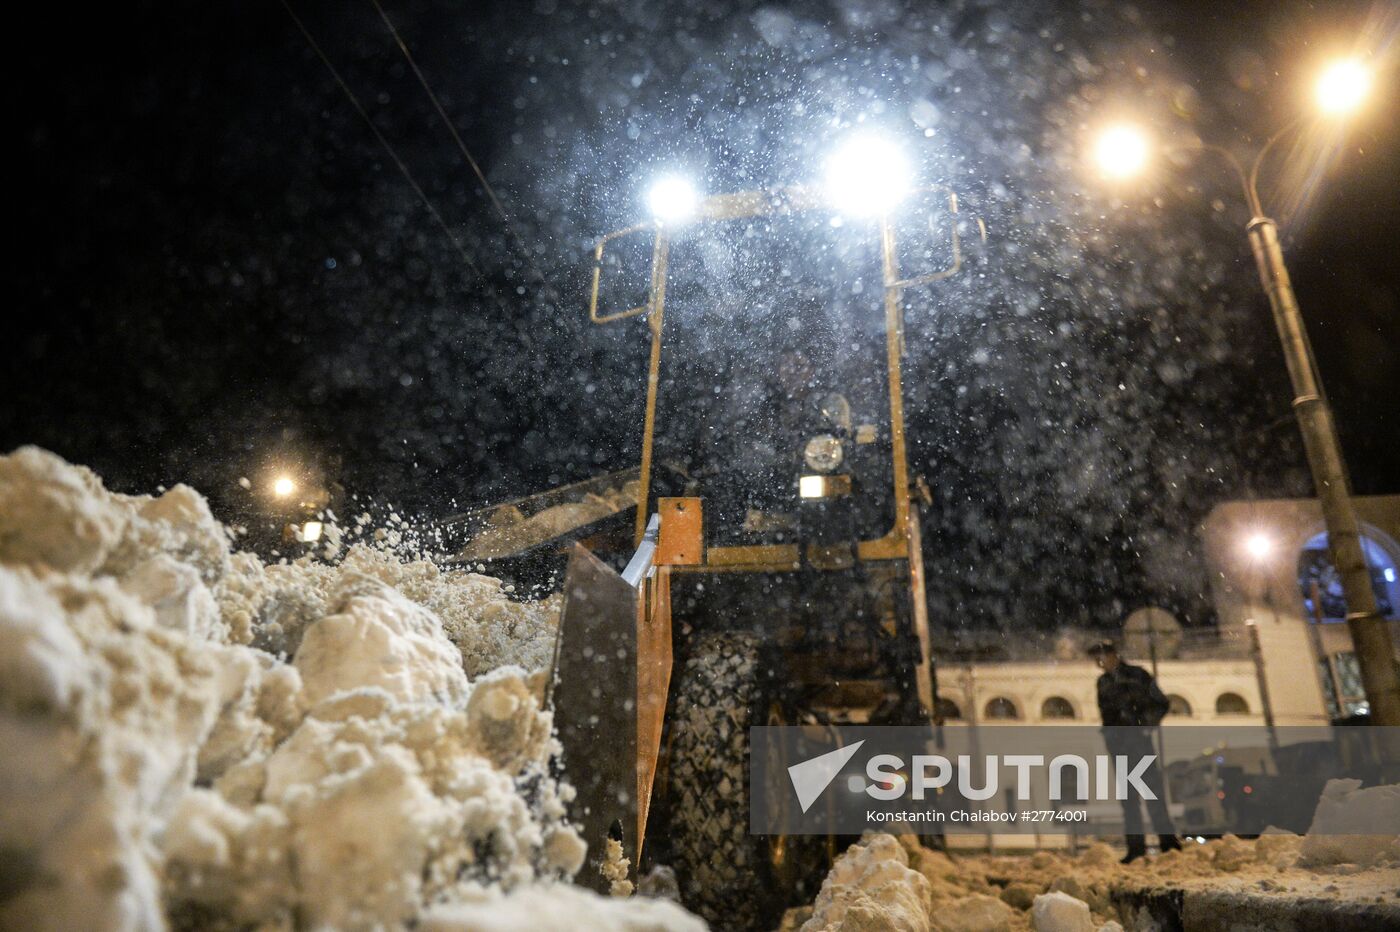 Snow cleaned in Russia's Veliky Novgorod